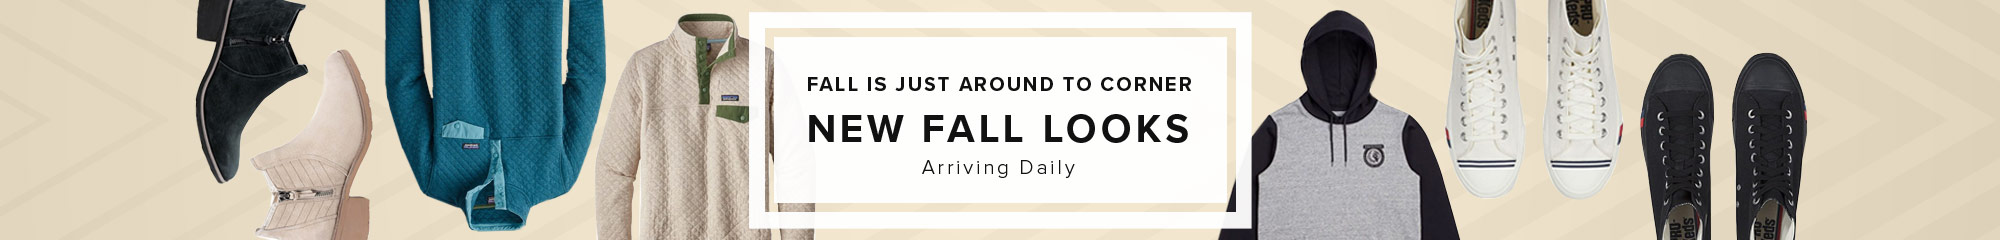 Fall Fashion for chilly days. Shop sweaters, jackets, boots and more